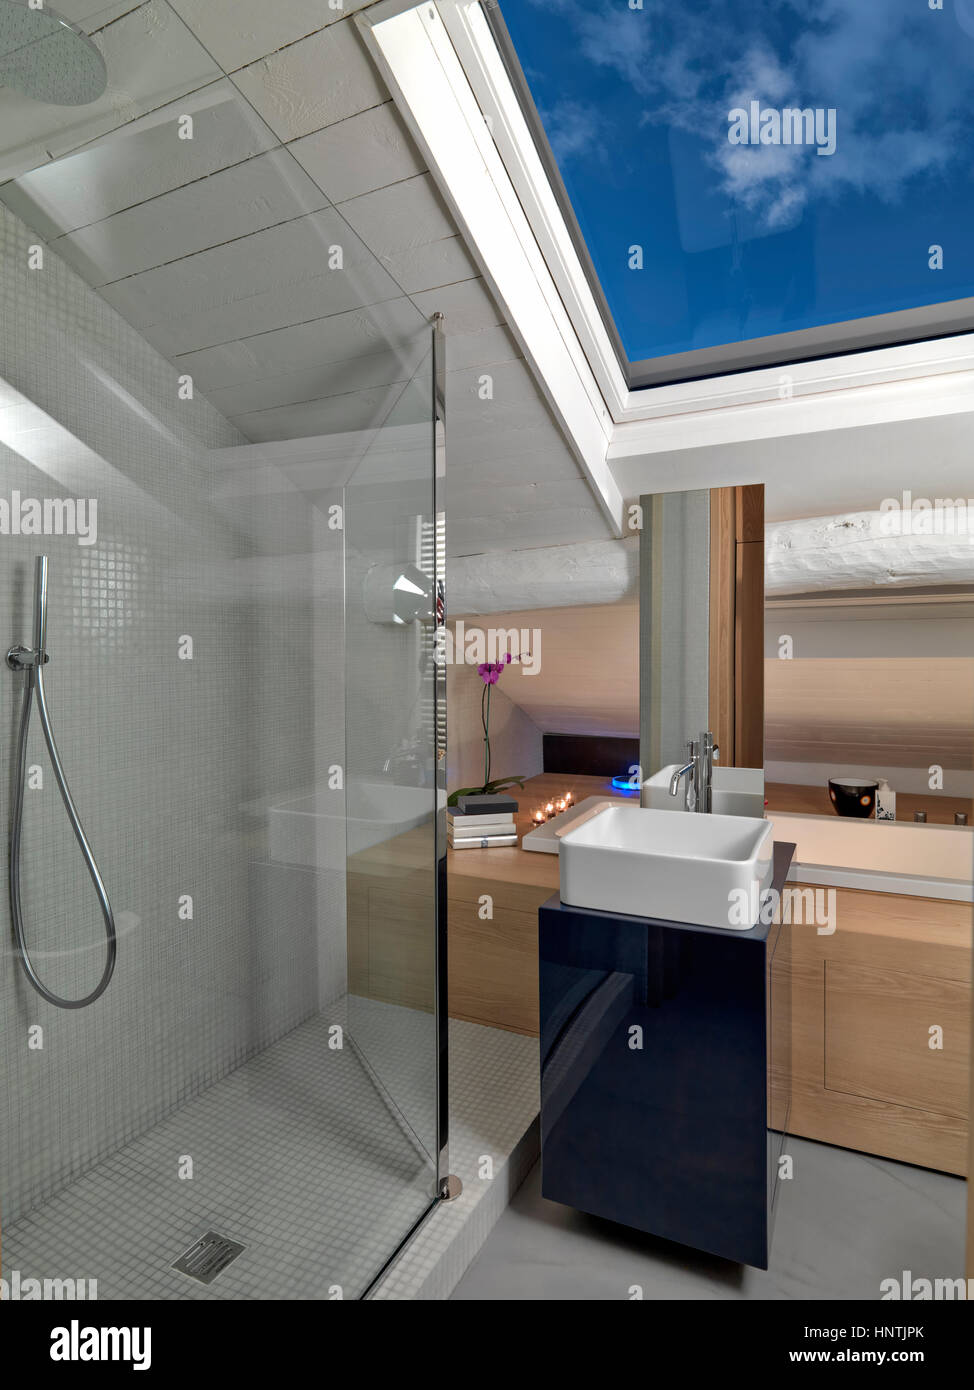 interior view of a modern bathroom in the mansard with glass shower cubicle and counter top washbasin Stock Photo